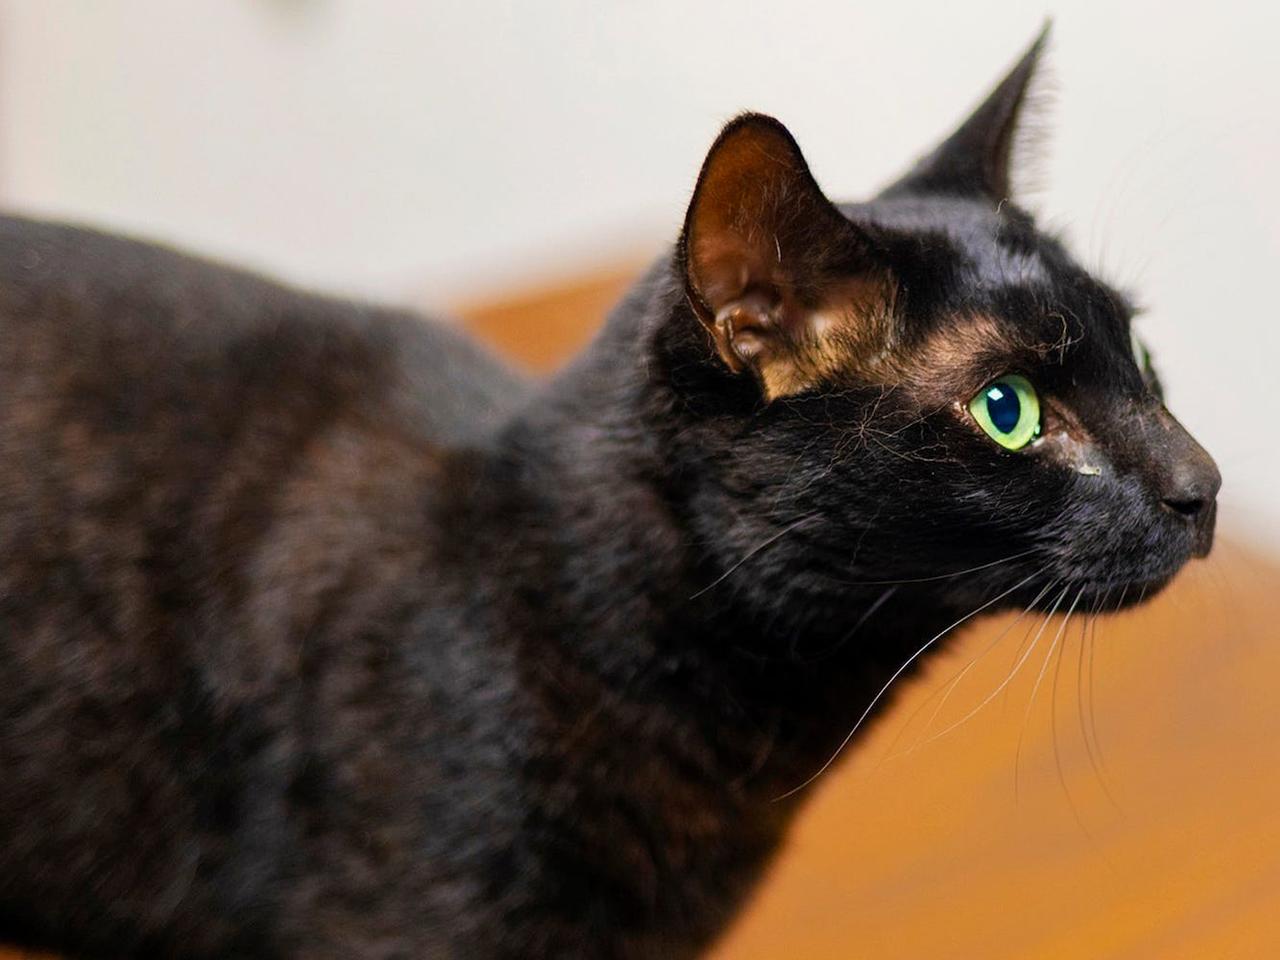 The cat, called Rowdy, went missing at Boston Logan airport after flying in on a Lufthansa flight